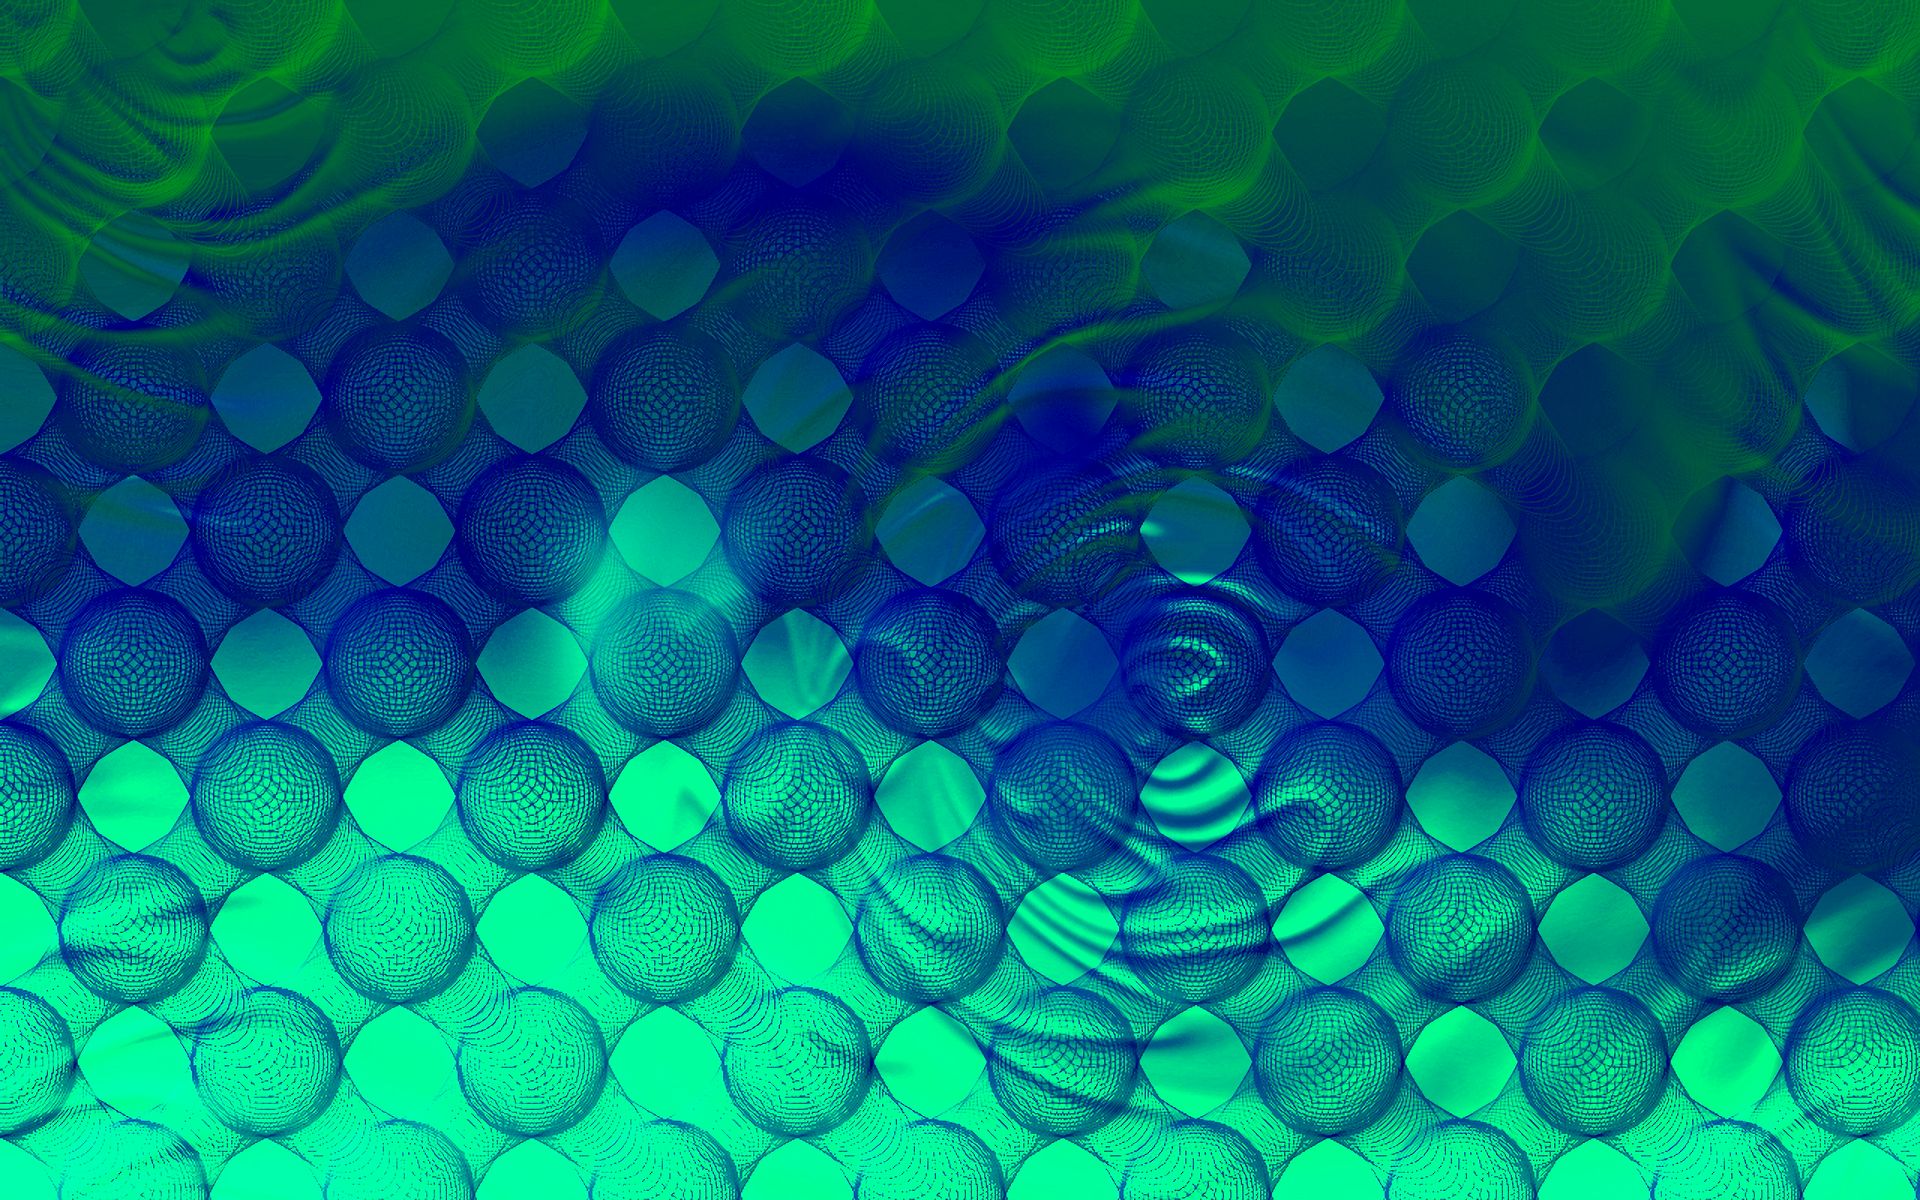 abstract, pattern, blue, circle, green, octagon, ripple, water